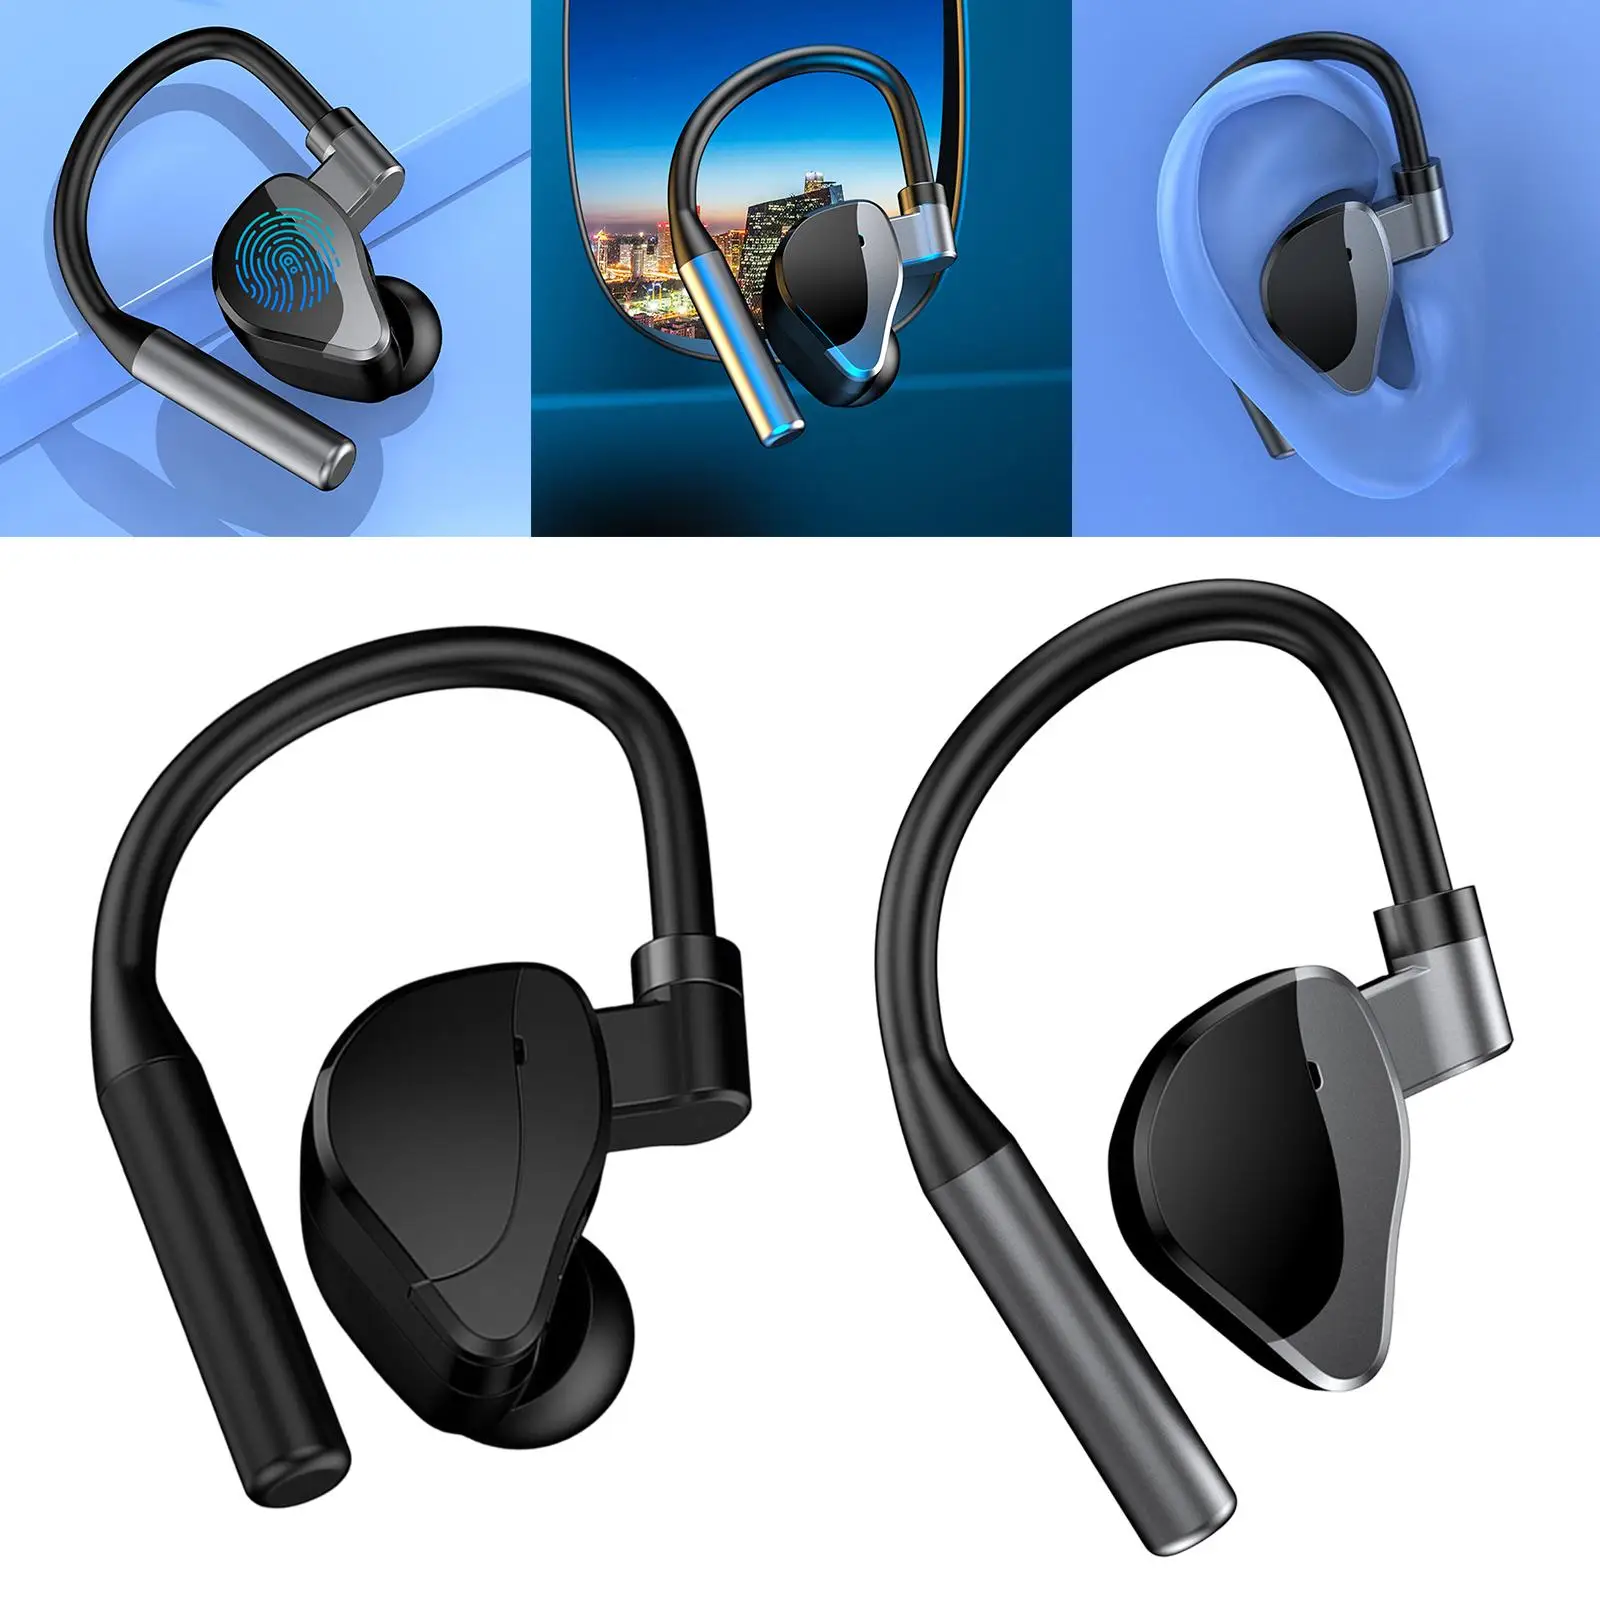 Business Headset Low Latency Calling HiFi Earbuds Headphones for Workout